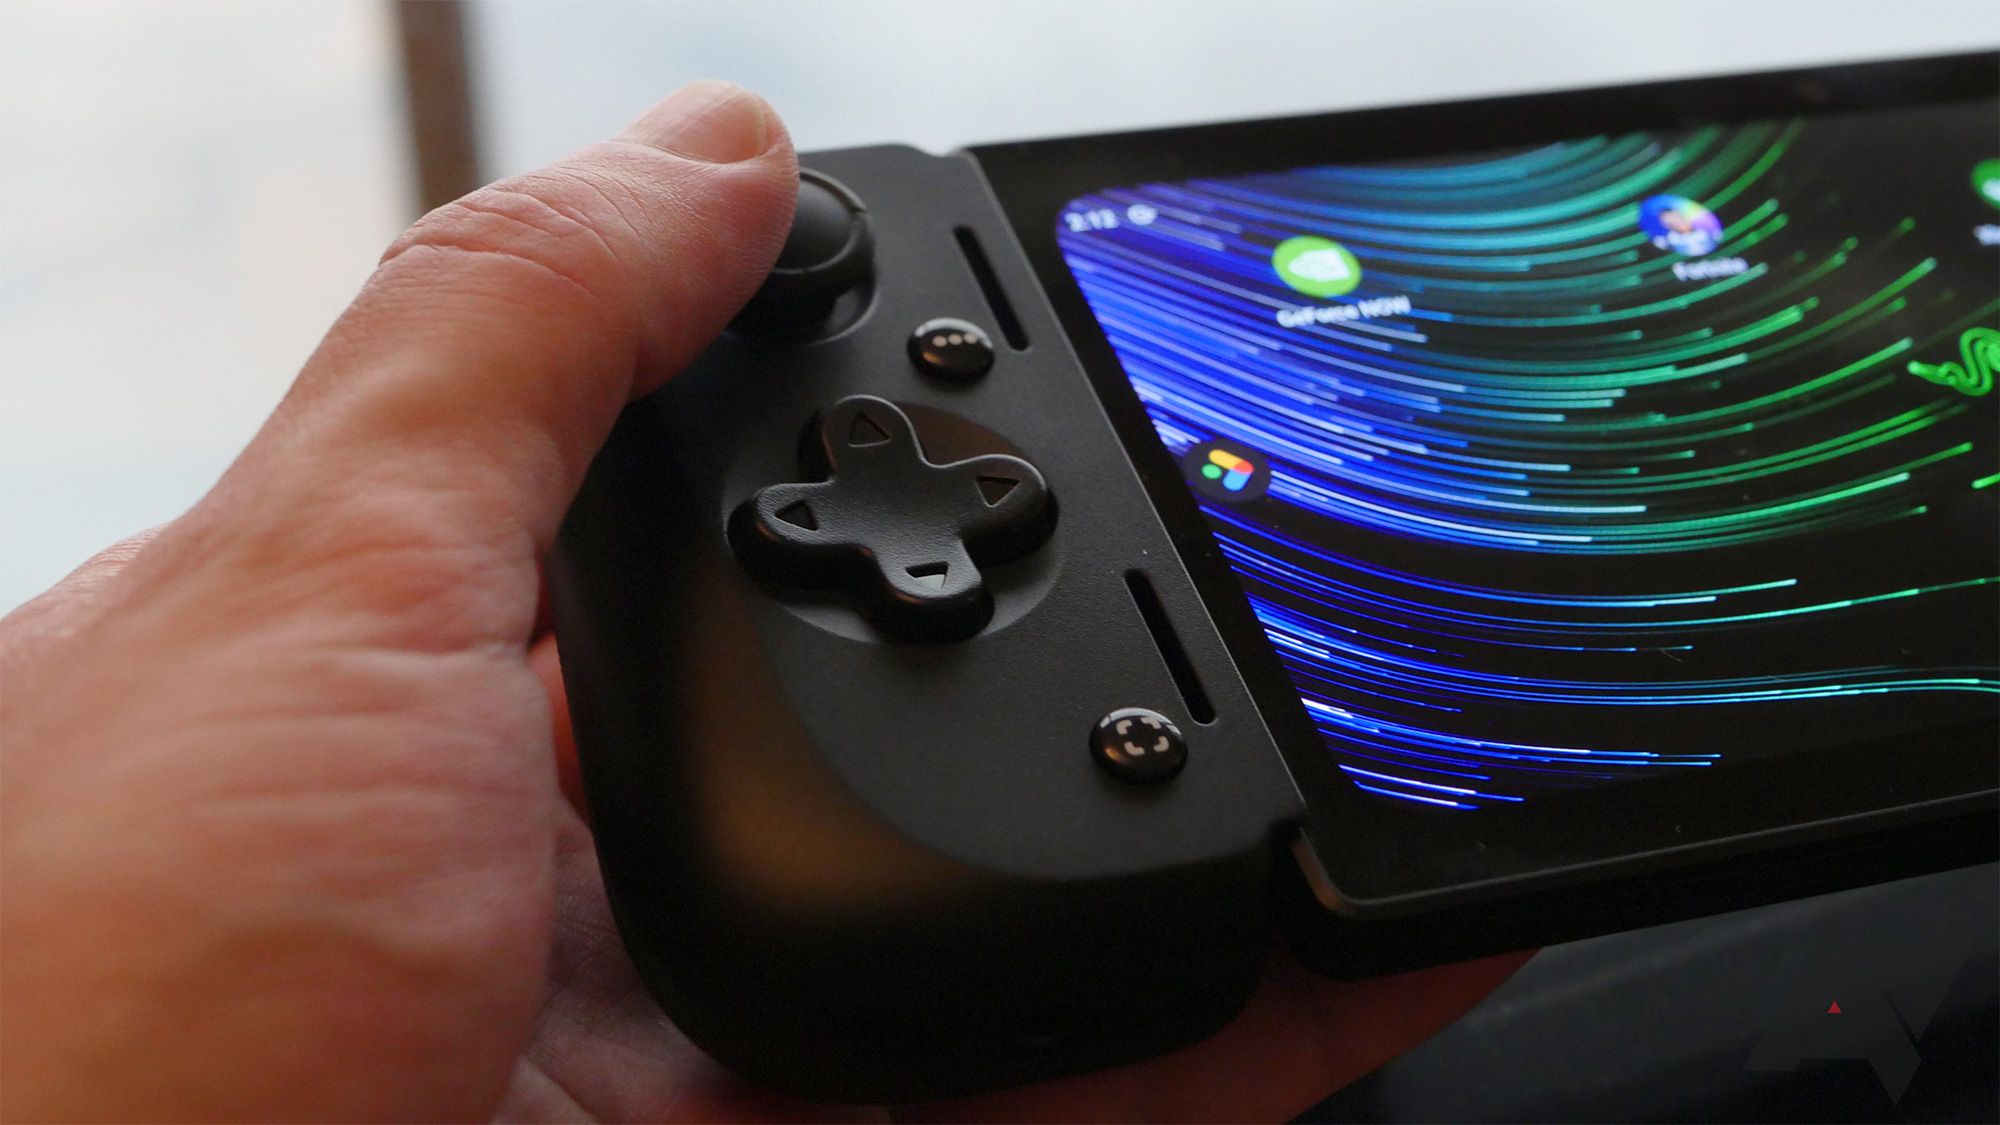 A close up view of the Razer Edge's buttons and display